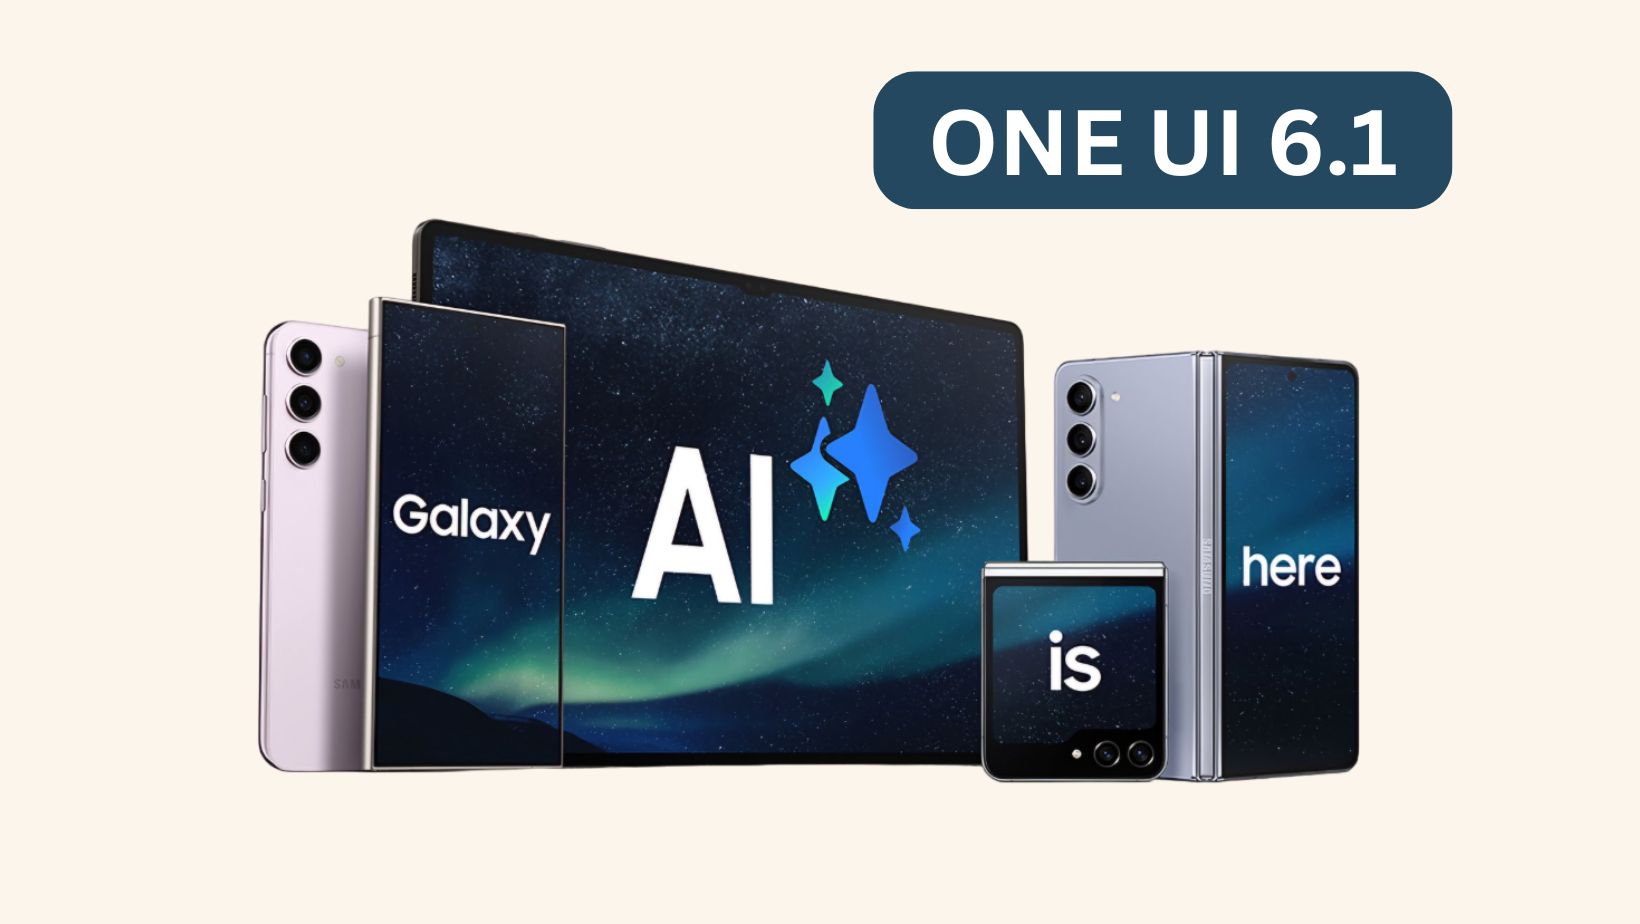 One UI 6.1 Update Released for Several Galaxy Devices including S22 and S21 series